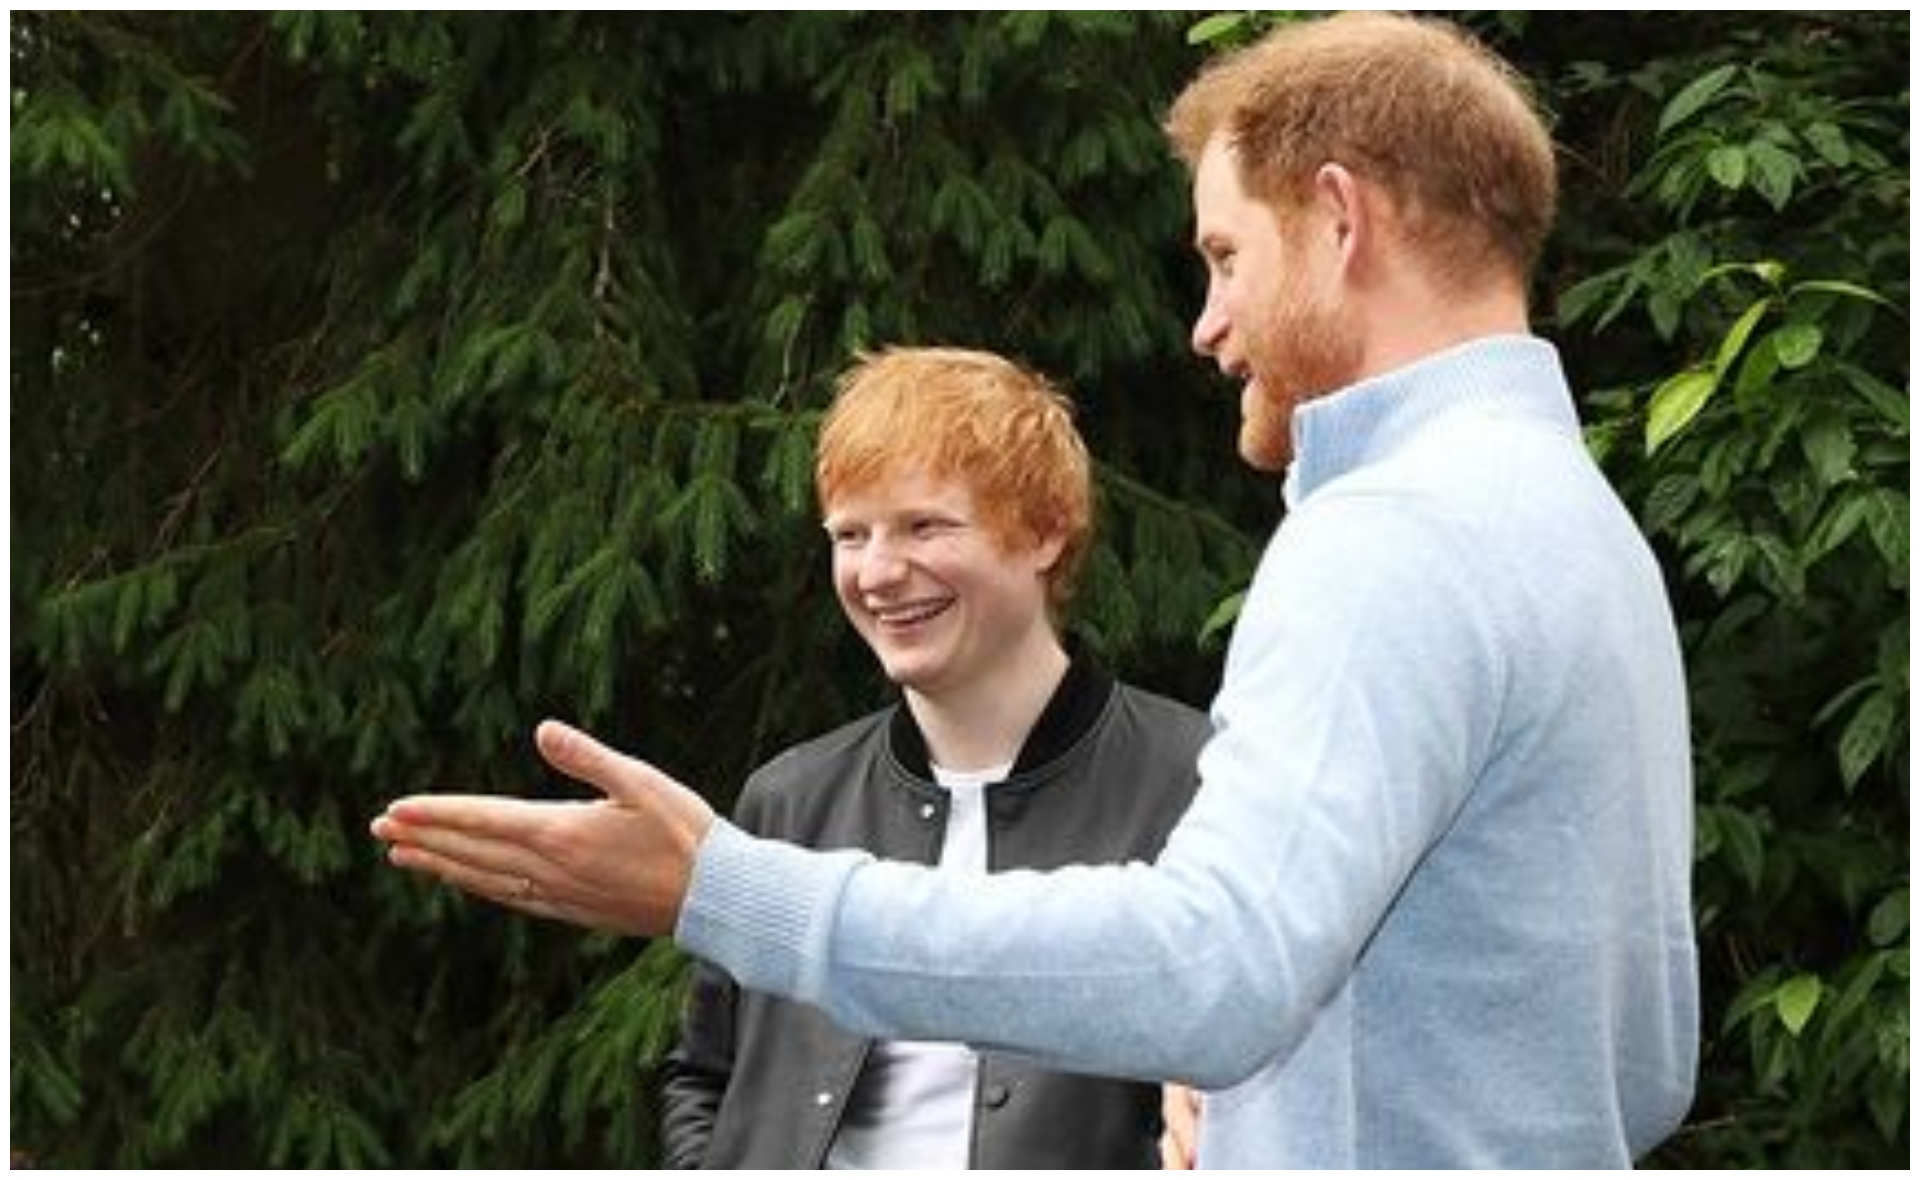 Prince Harry bonds over fatherhood with Ed Sheeran in his first public outing since arriving back home in the UK